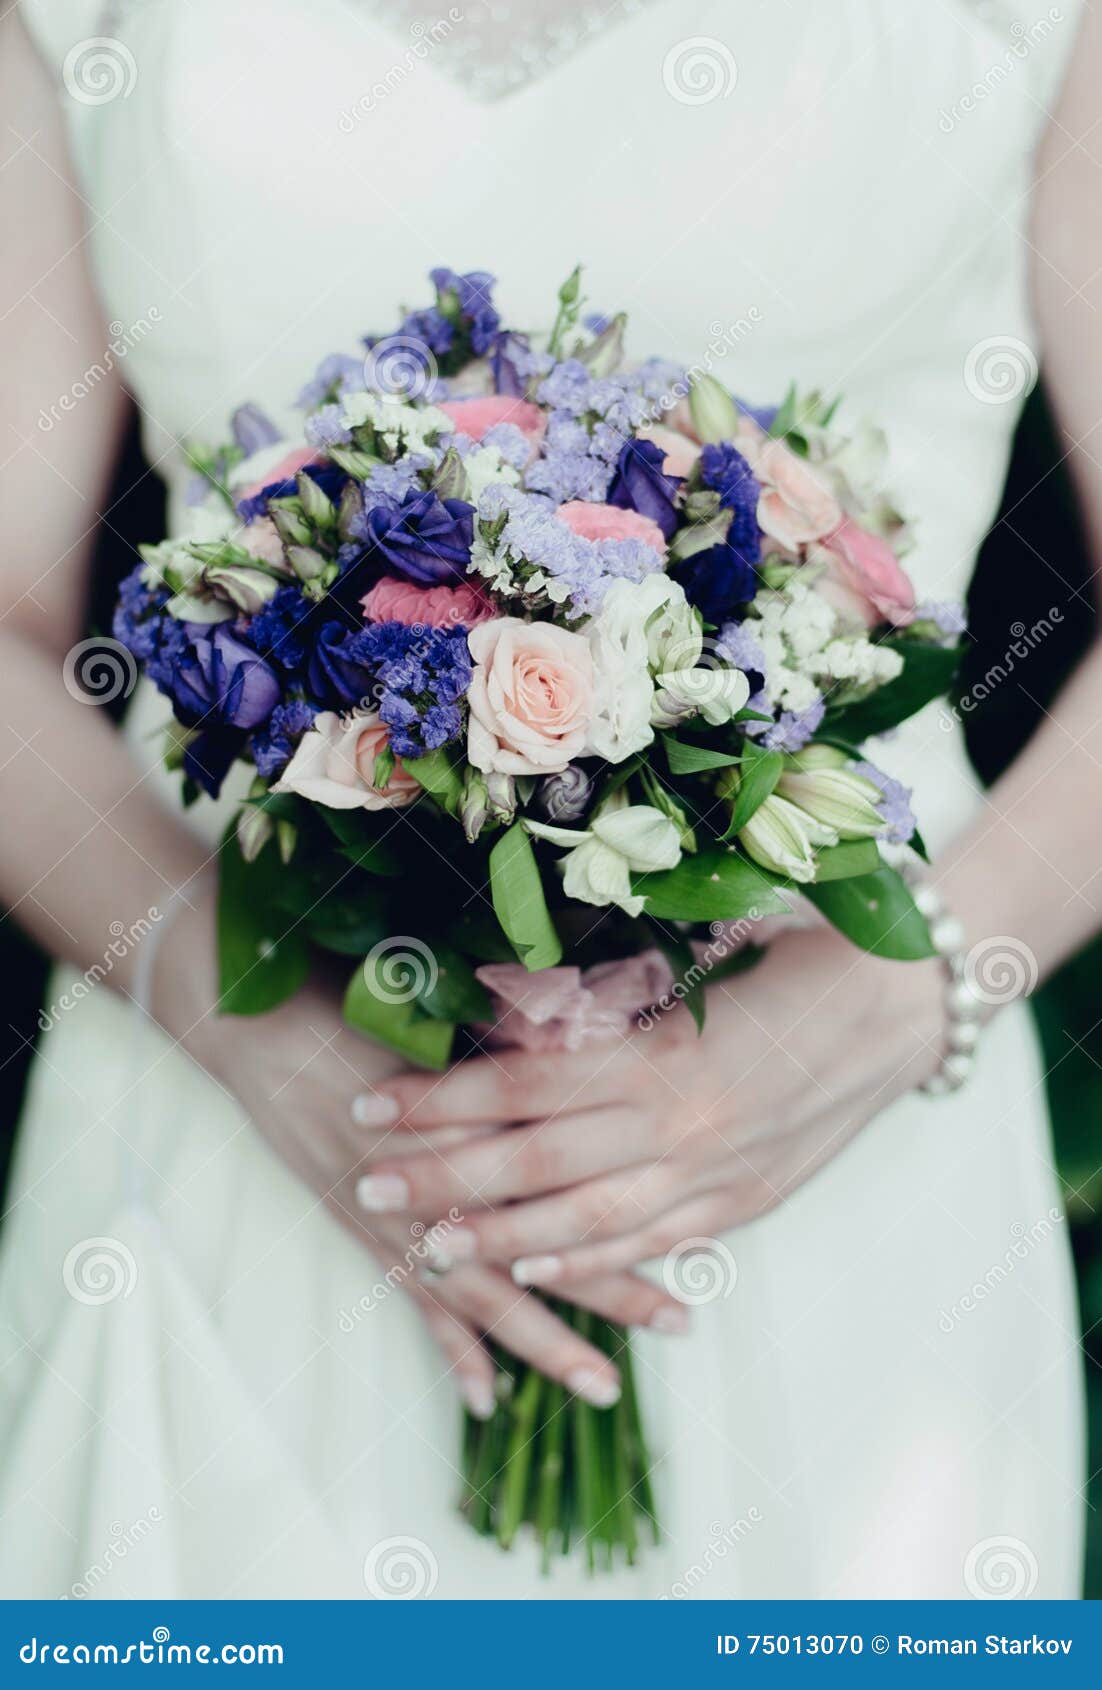 the bride holds a wedding bouquet